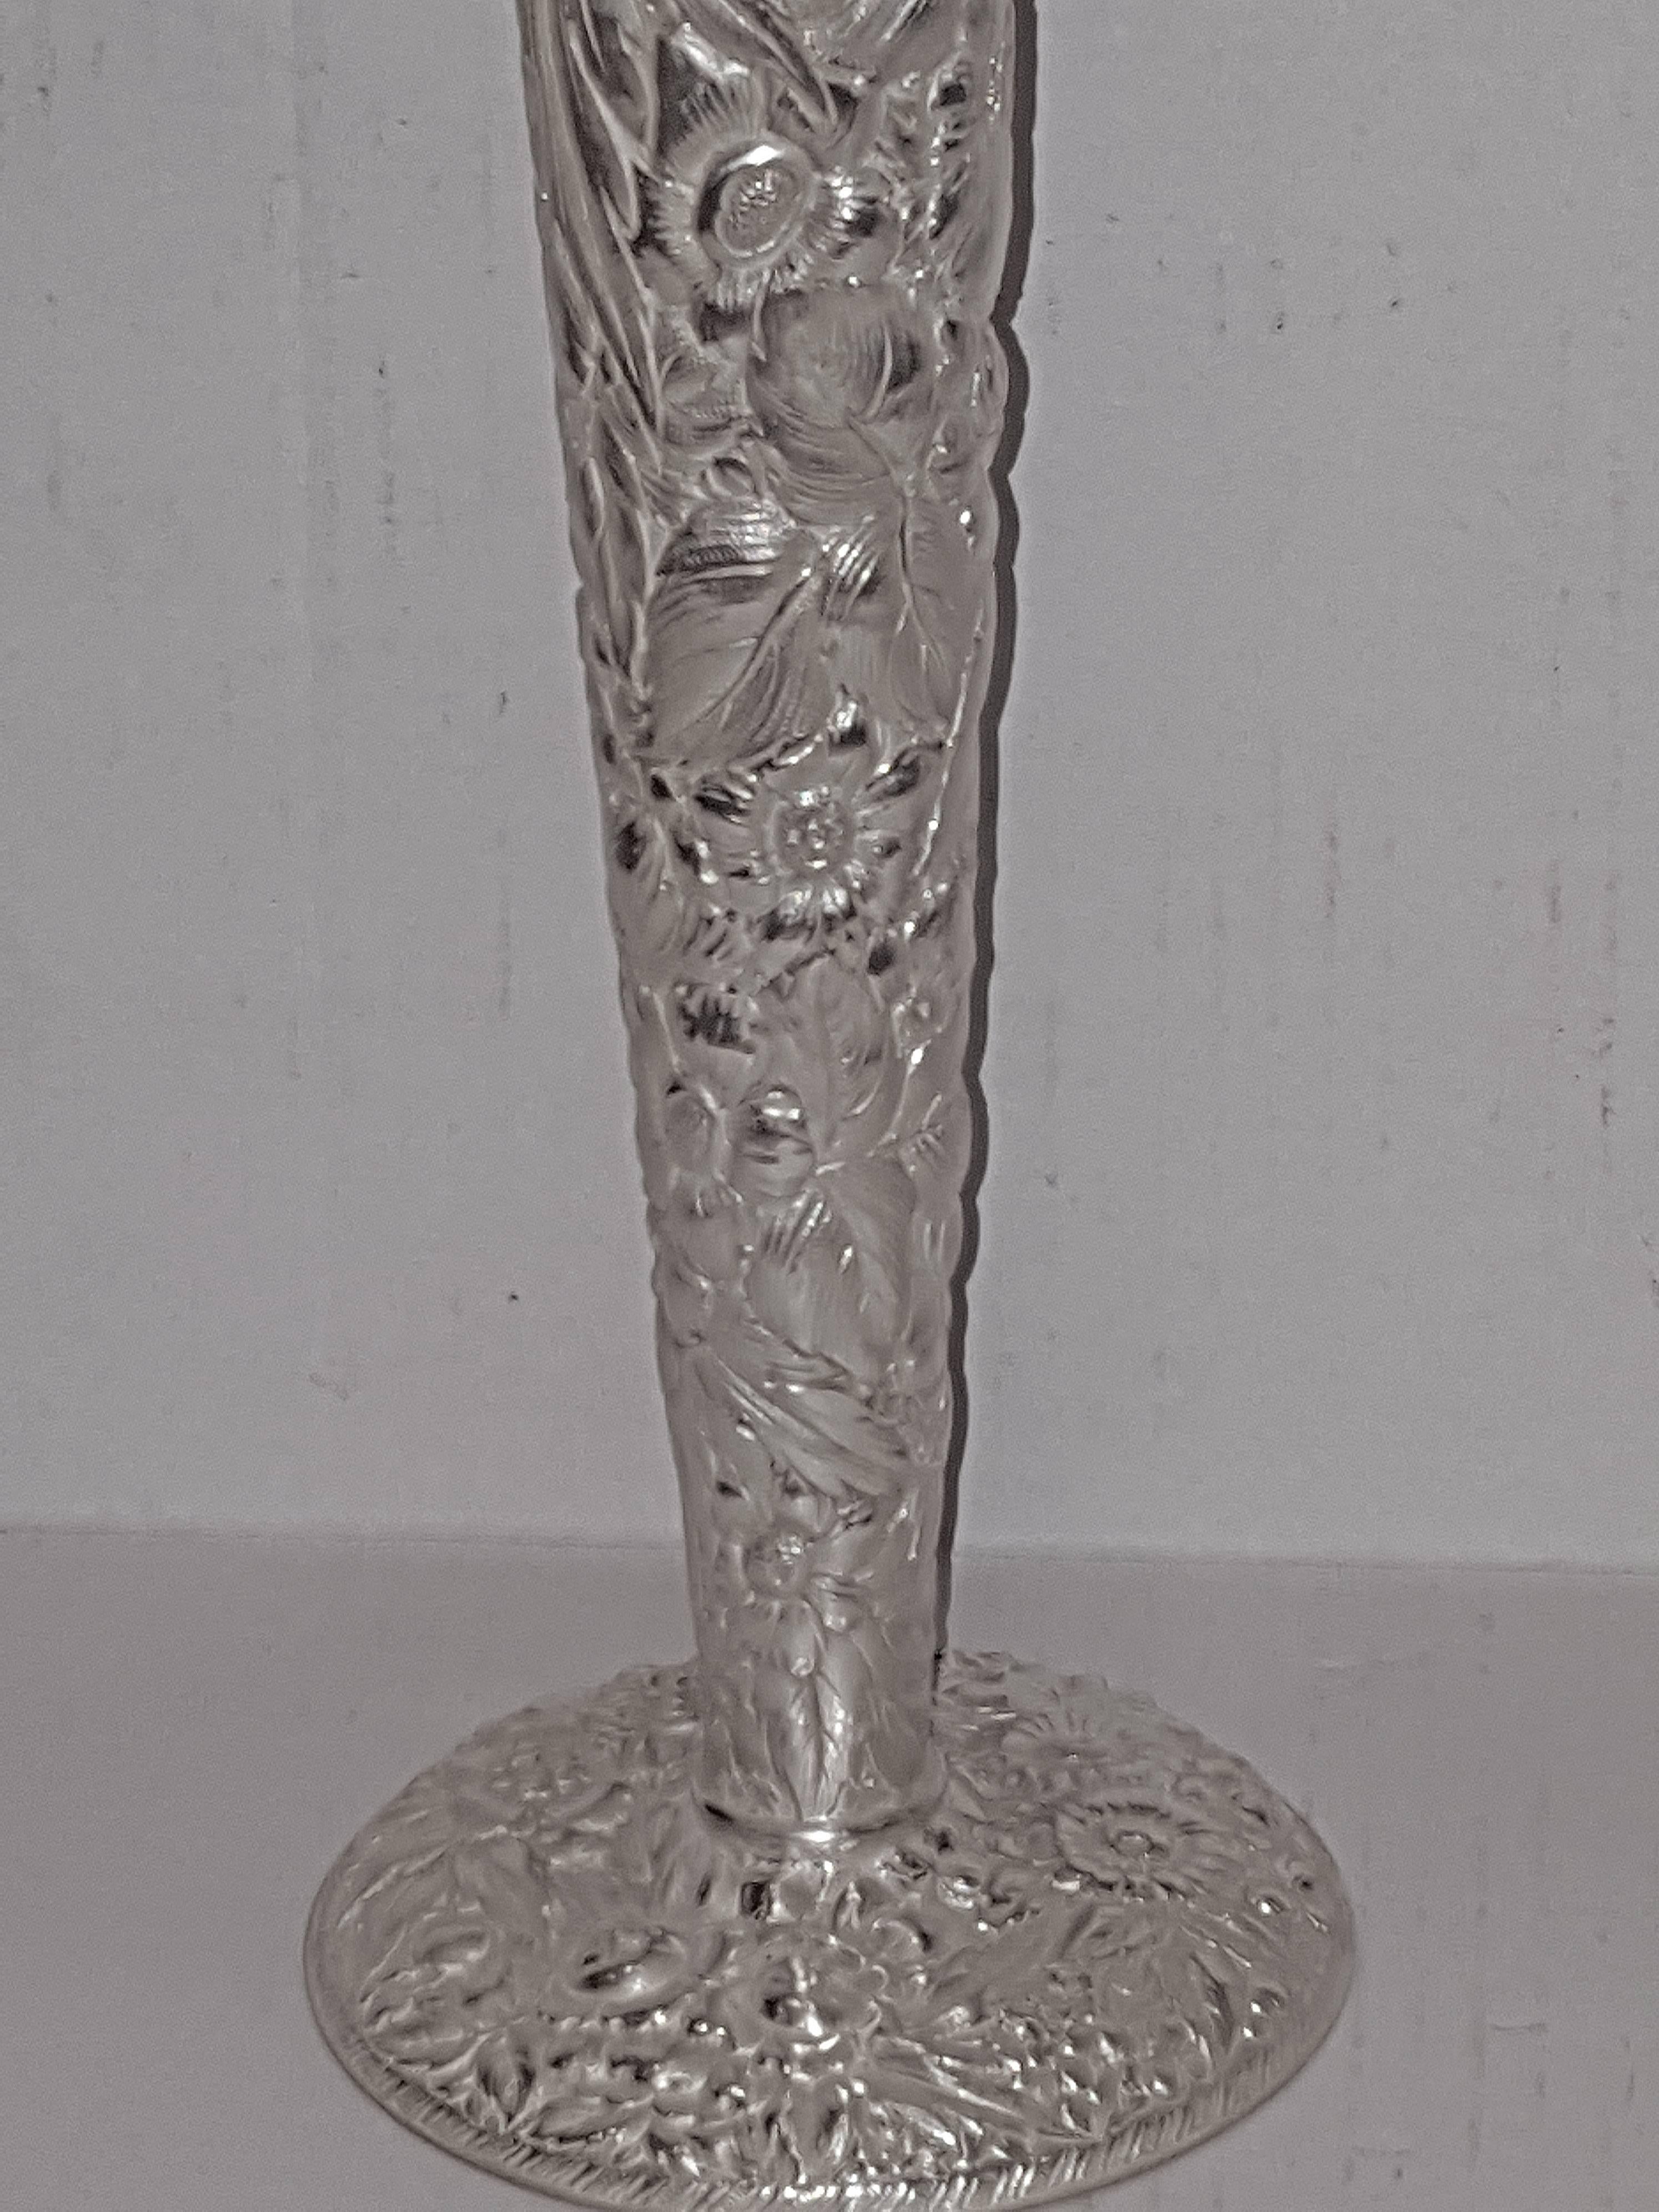 Pair of 1900s silver plated vases with very detailed floral decoration.

Measurements:
18